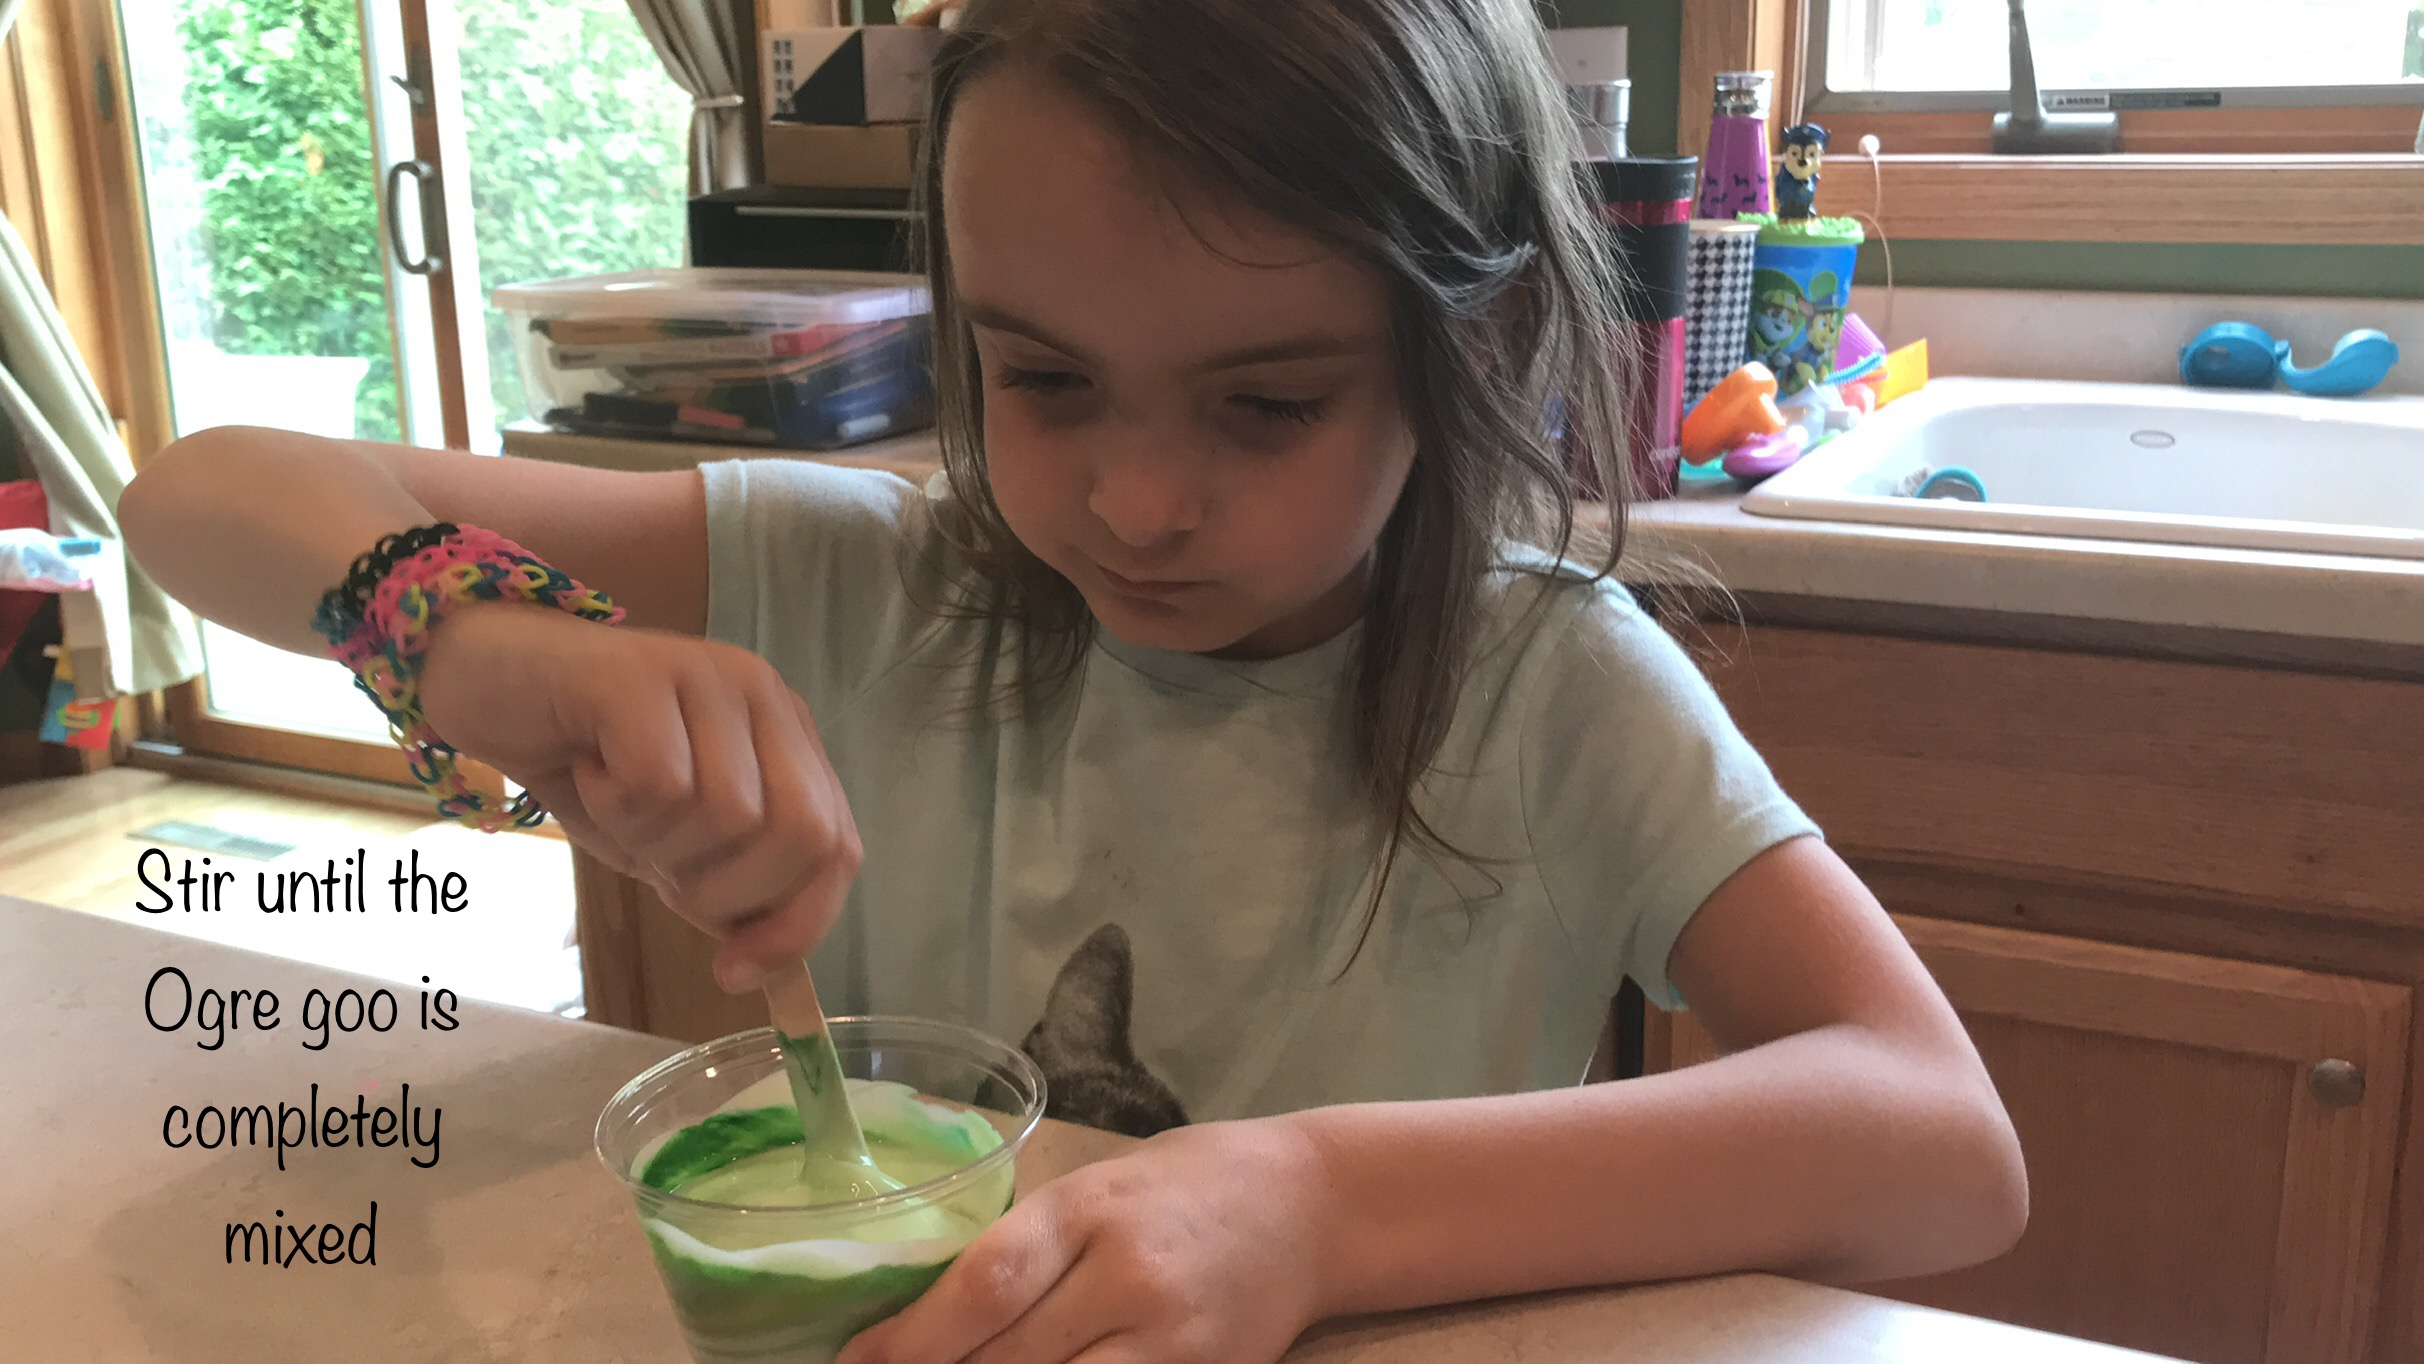 ogre slime stir ogre goo Learn about molecules, polymers, and chemical reactions with this oozing ogre slime Halloween sensory activity!